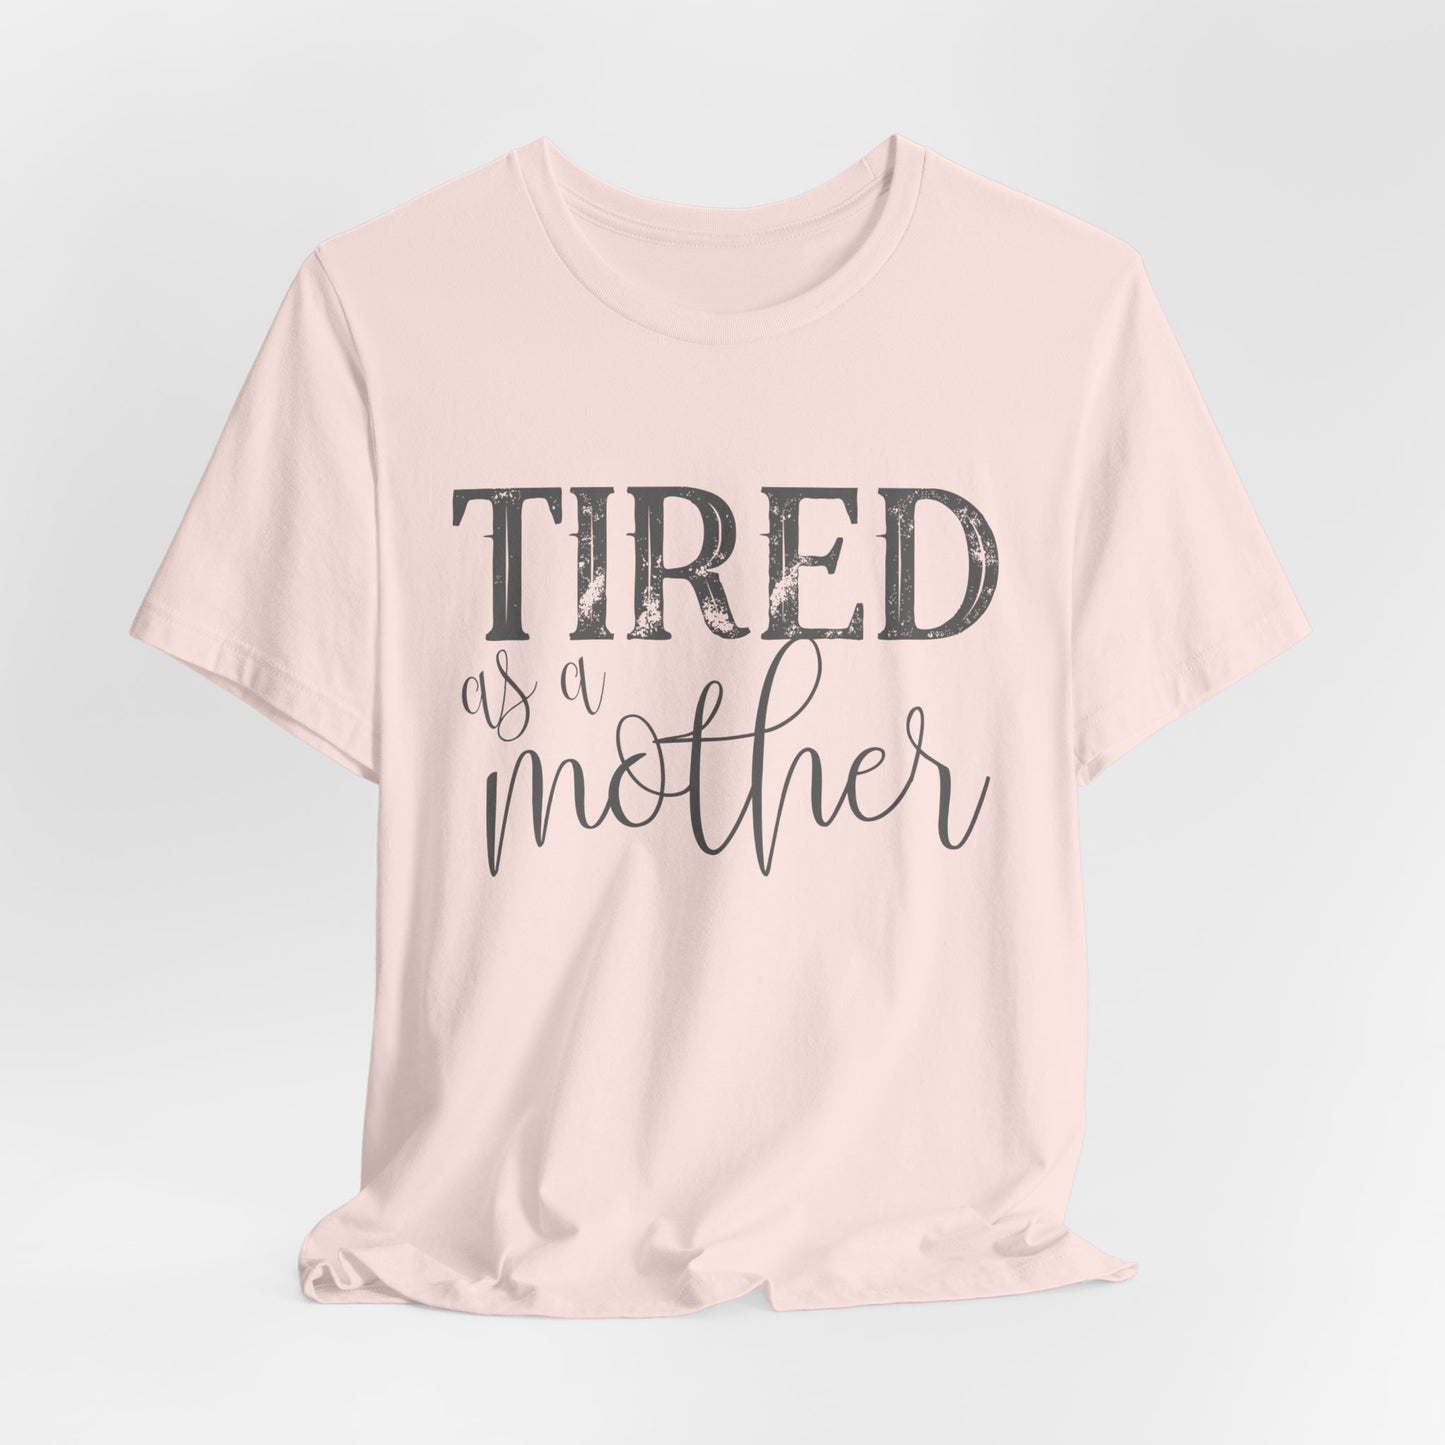 Tired as a Mother Funny Women's Short Sleeve Tee